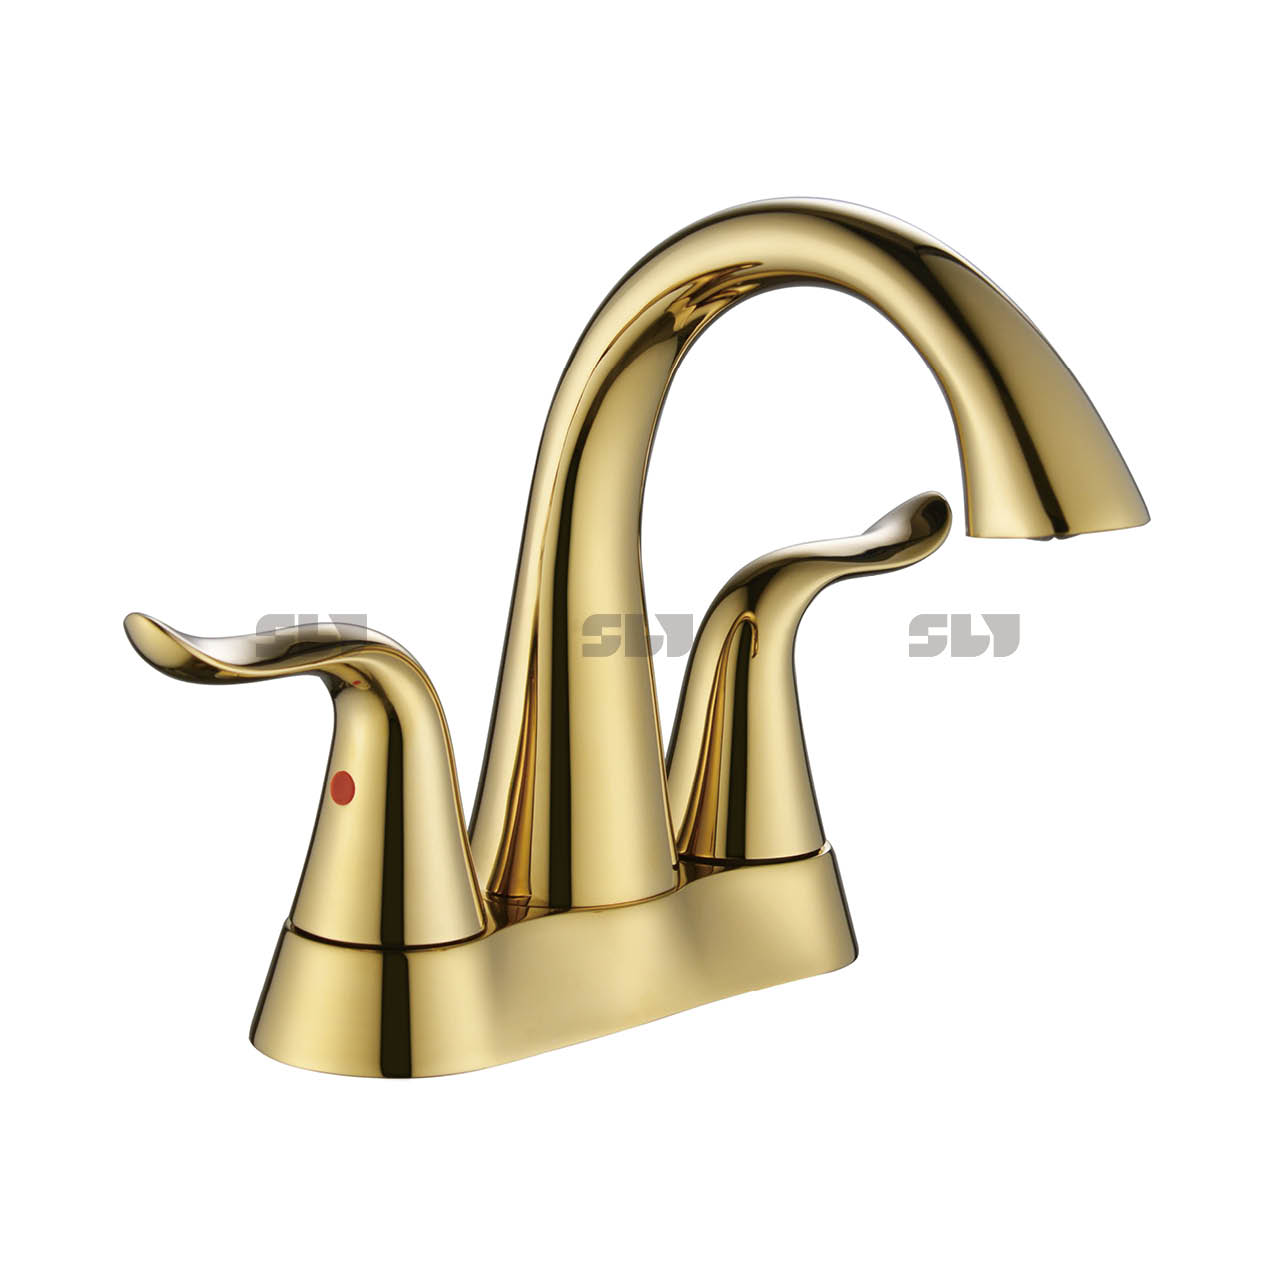 SLY Luxury CUPC Hot Cold Face Basin Faucet Deck Mounted Black Modern Bathroom Faucets